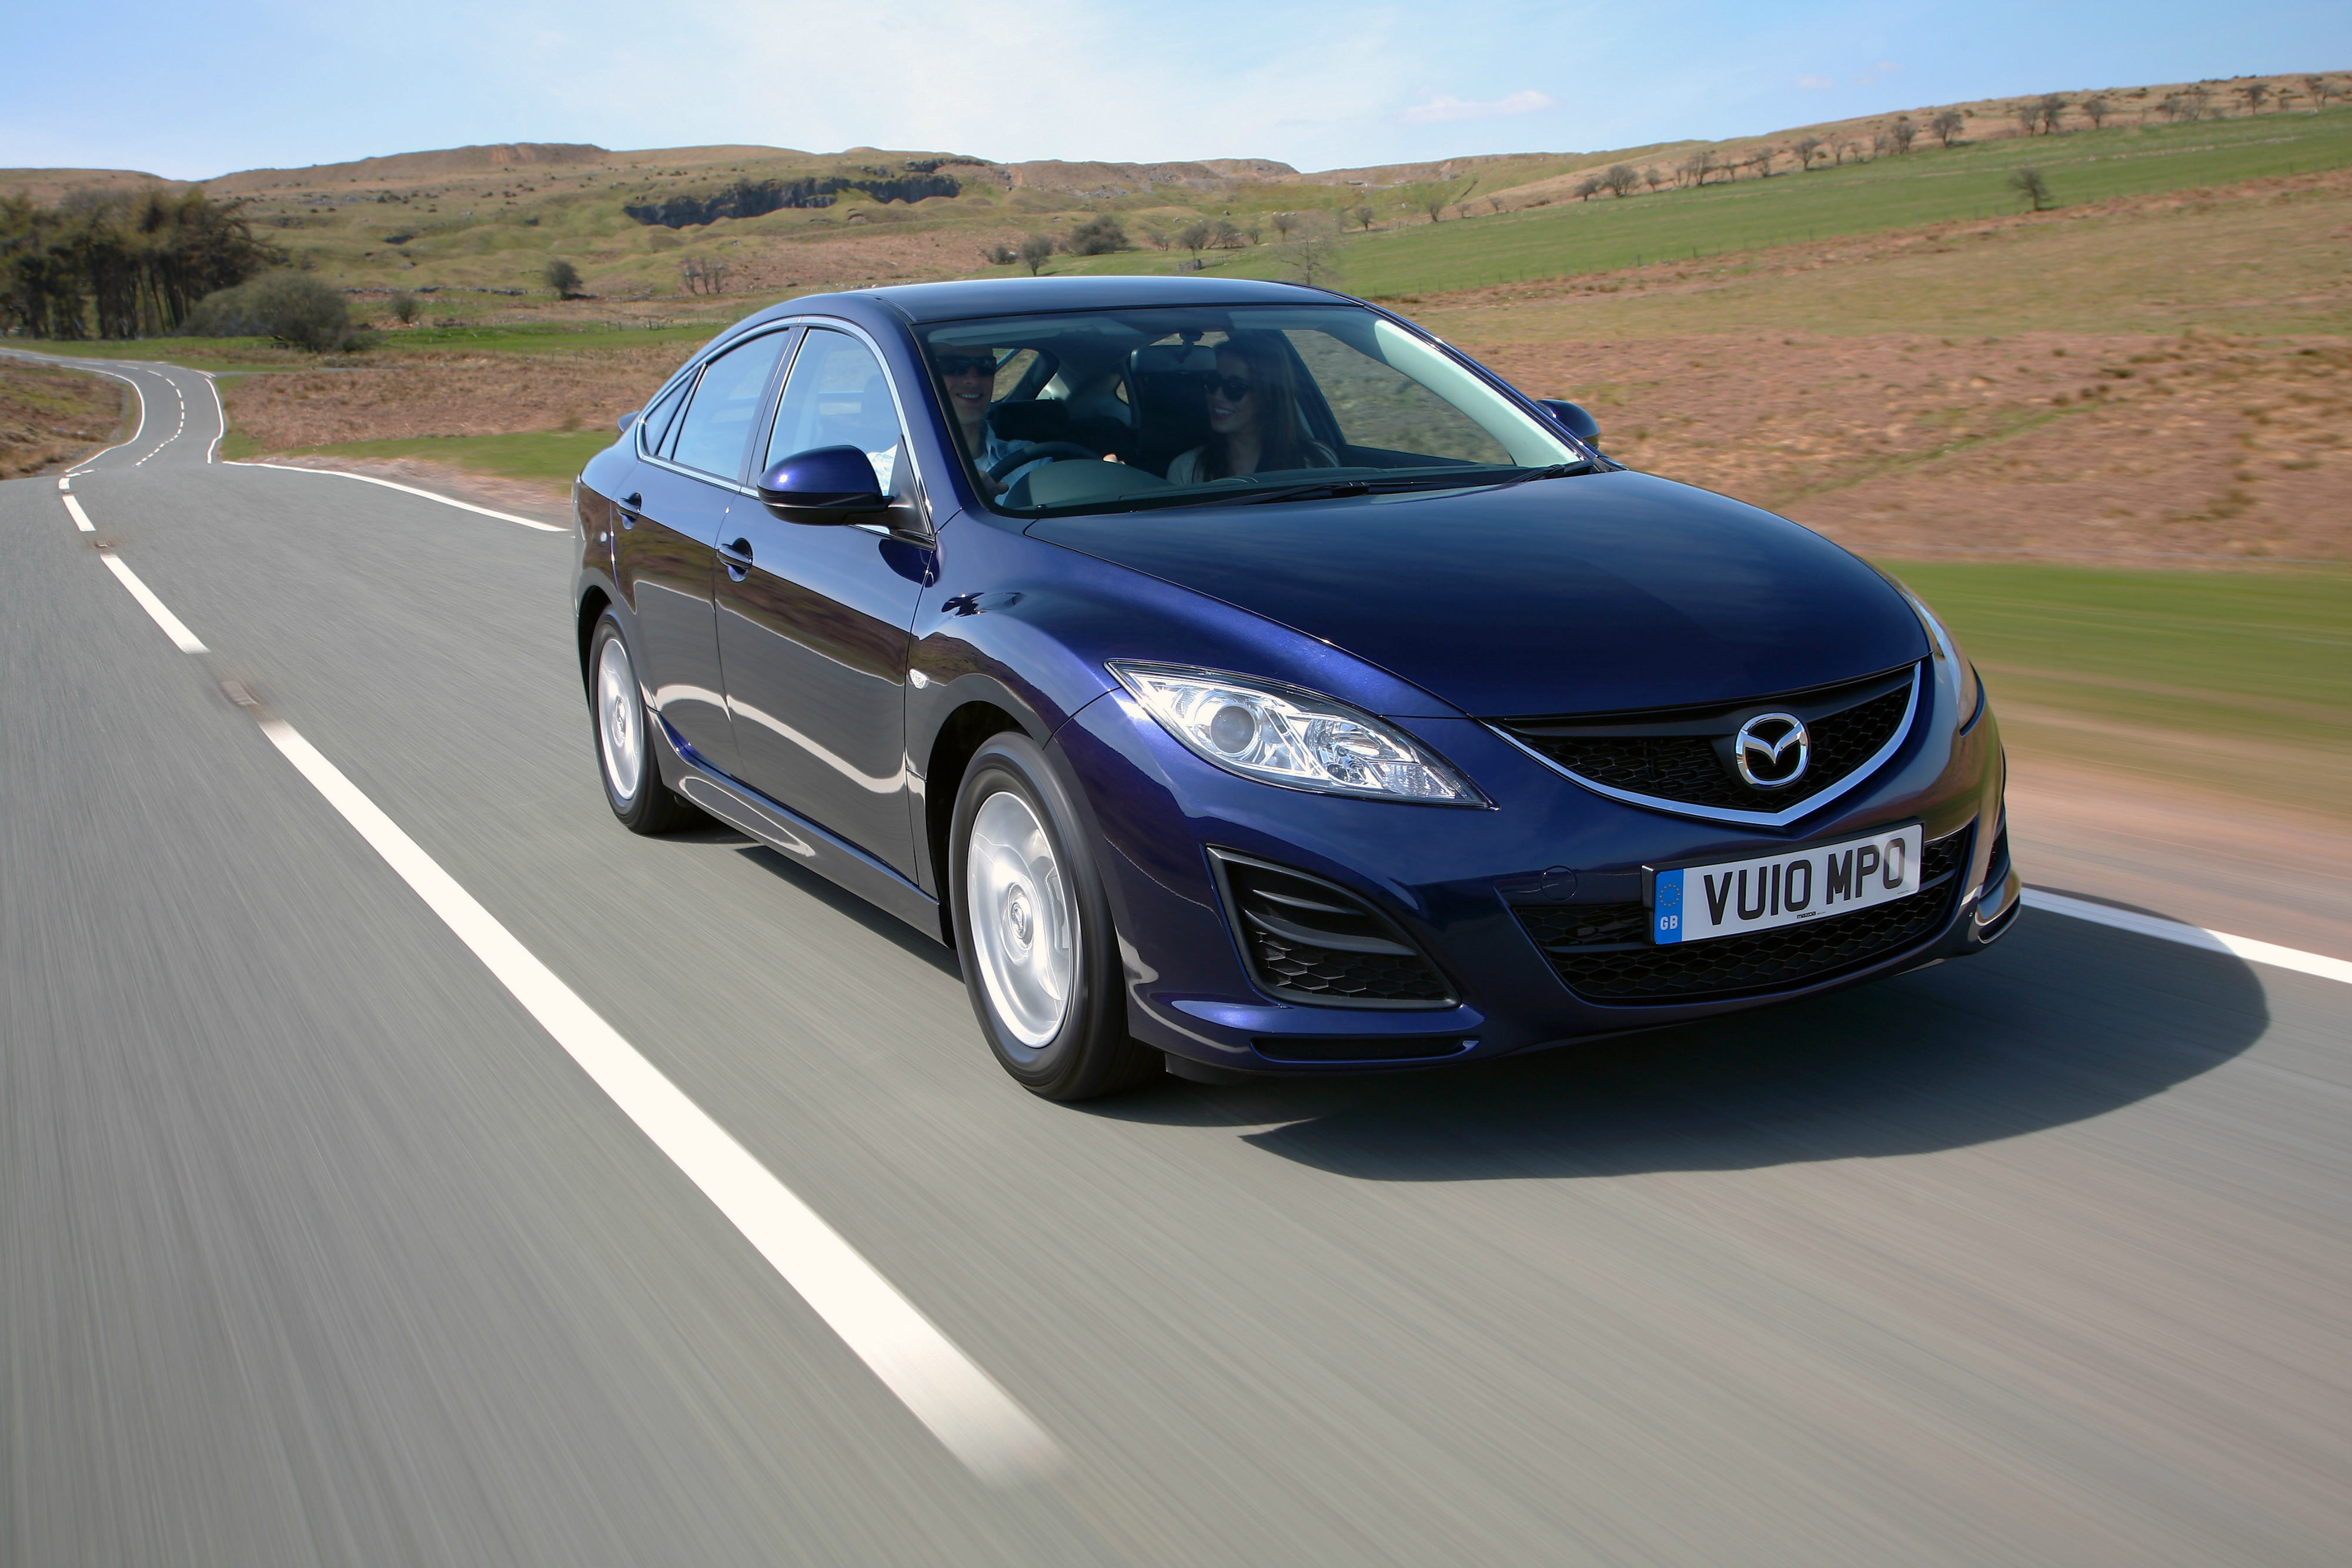 A used Mazda 6 makes a great alternative to the VW Passat for £6000